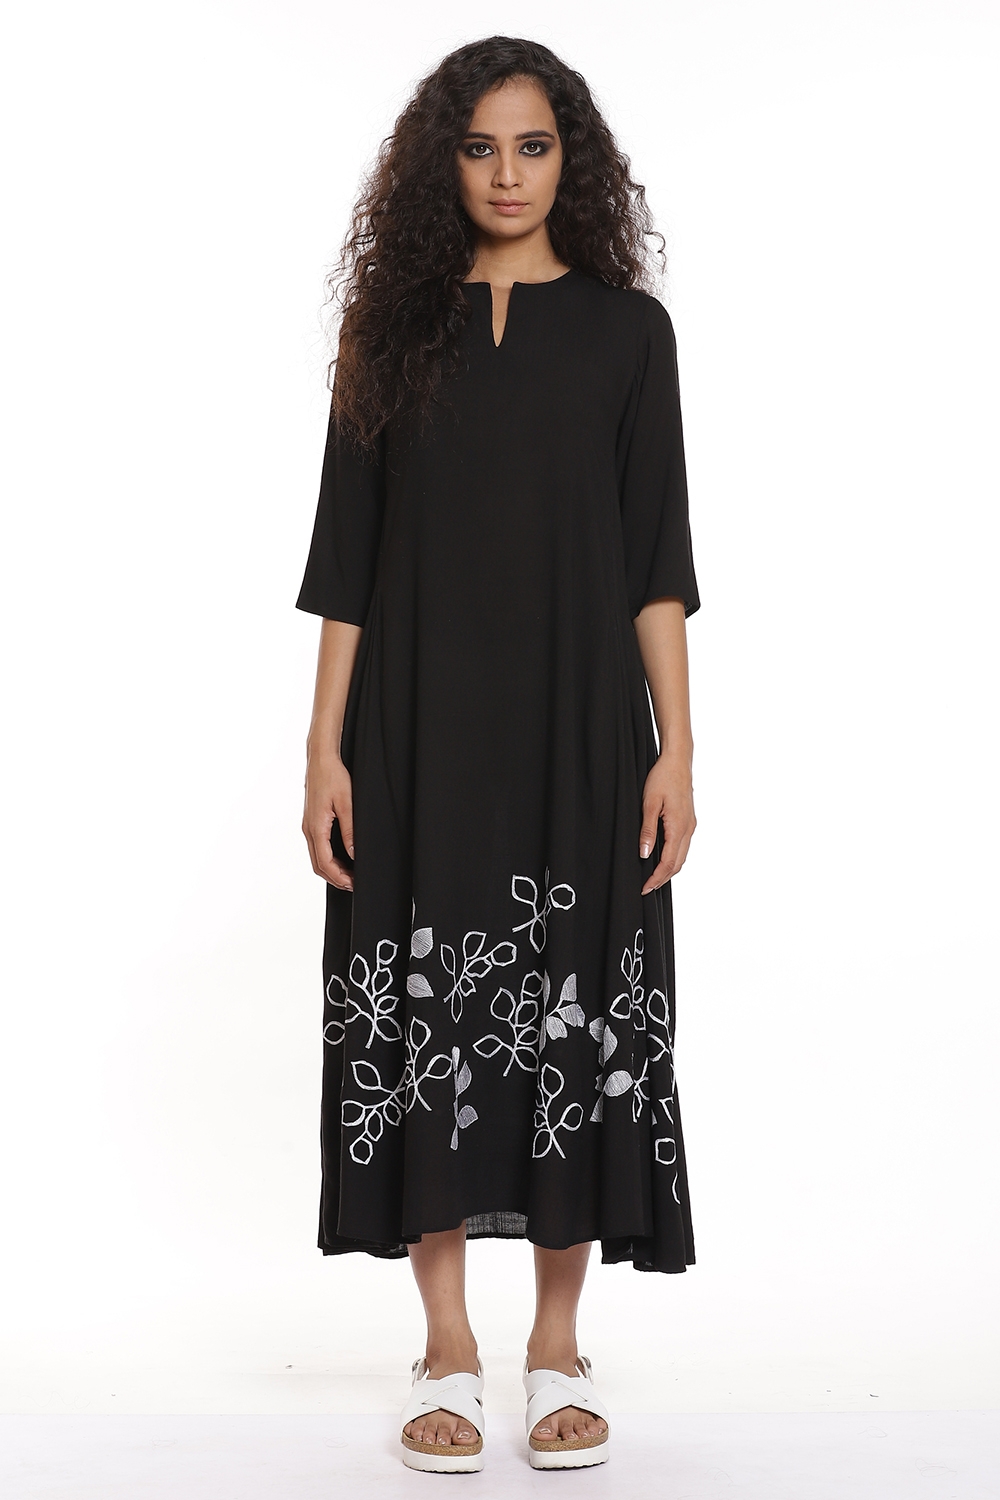 ABRAHAM AND THAKORE | Black And White Floral Embroidered Dress